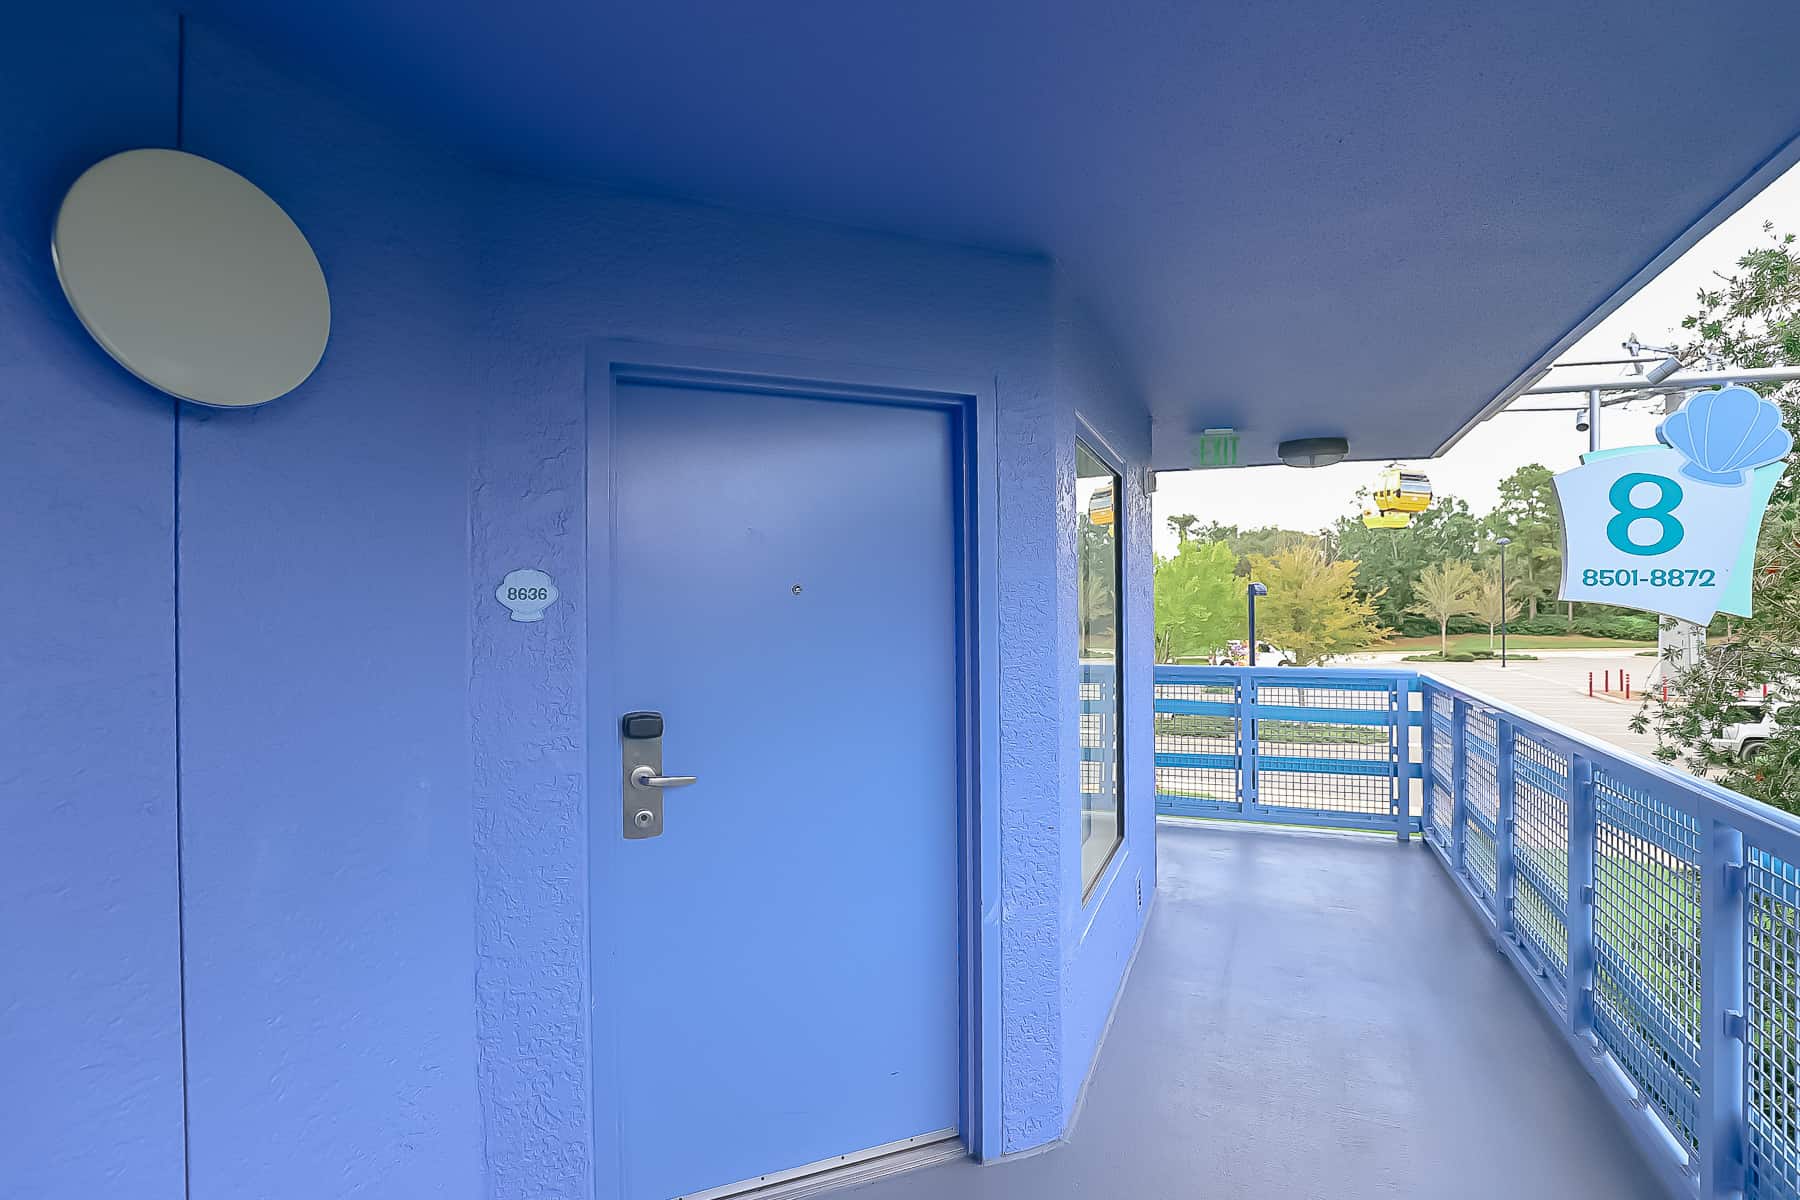 Building eight in the Little Mermaid section of Disney's Art of Animation Resort 